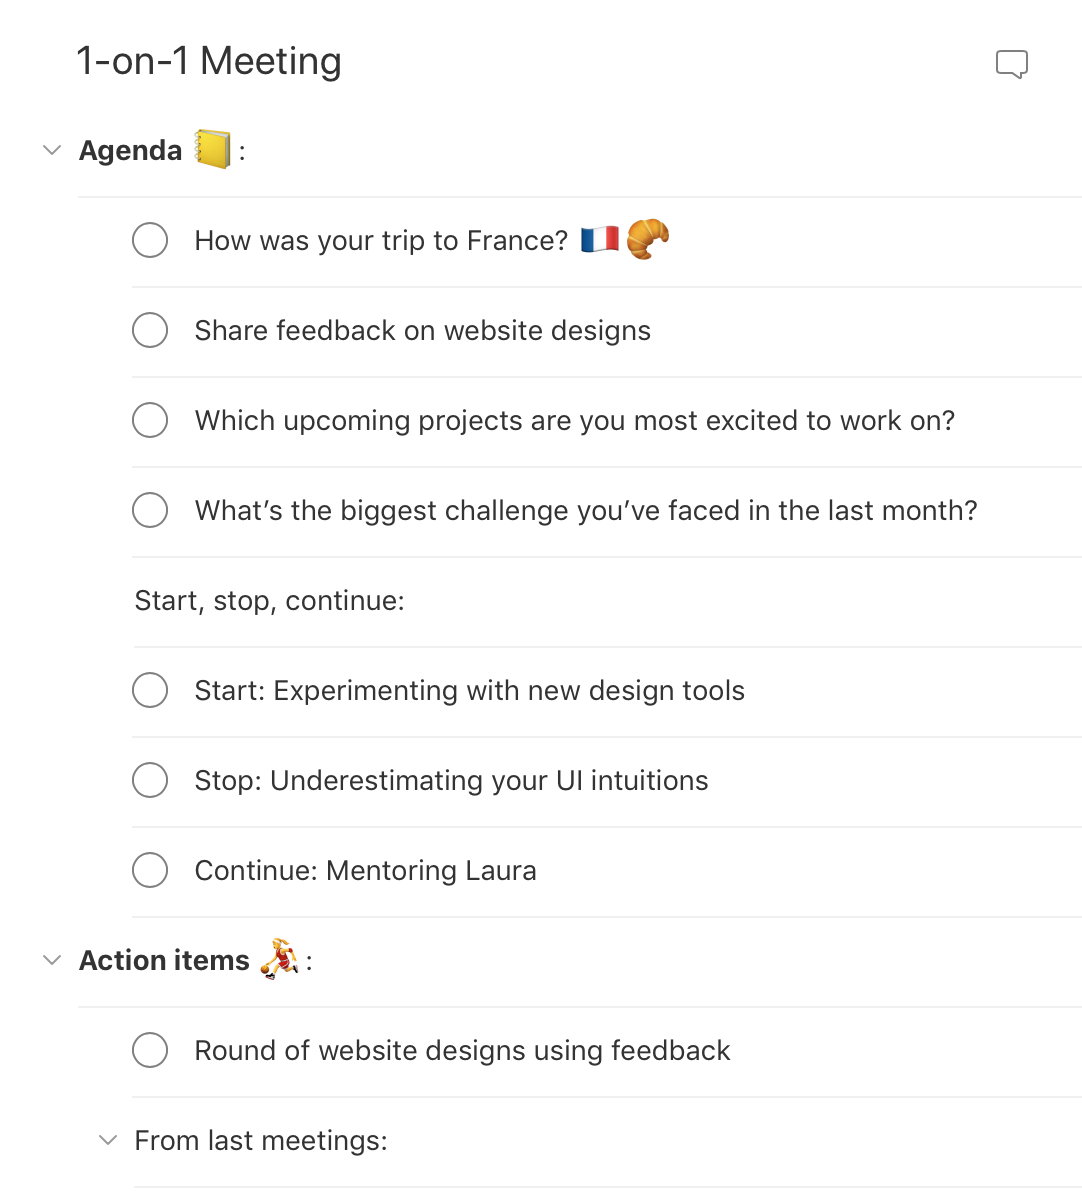 221-on-221 Meeting - Templates  Todoist Throughout One On One Meeting Agenda Template